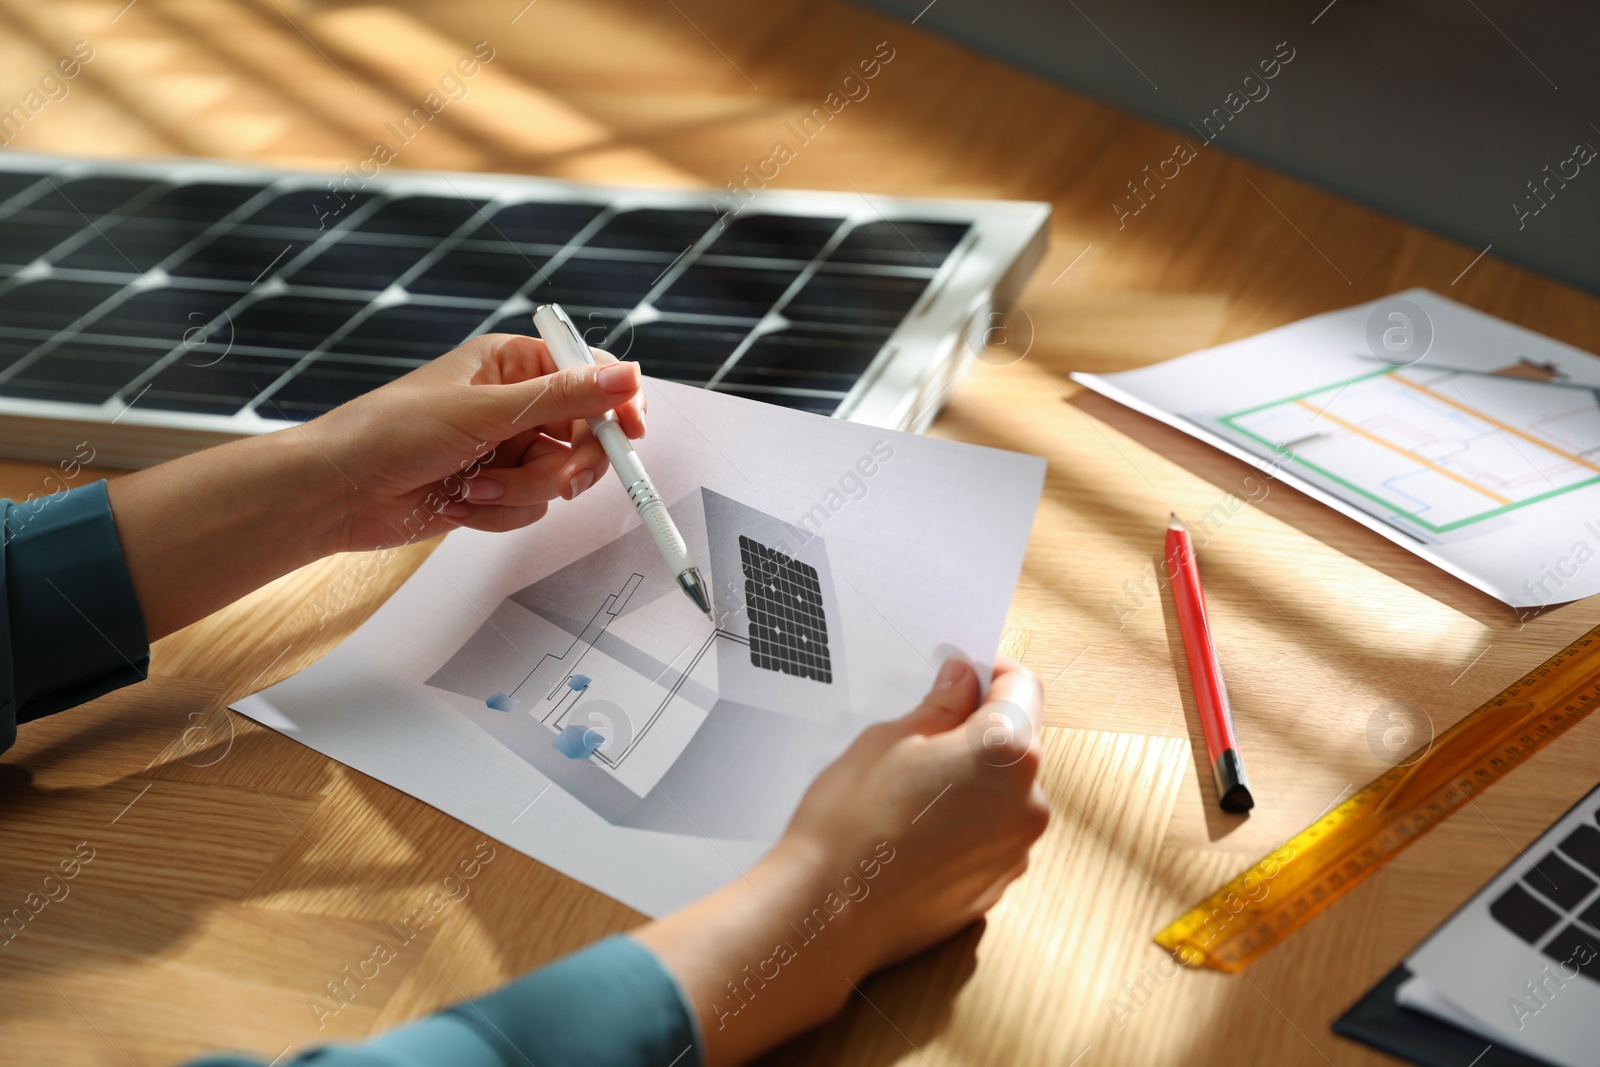 Photo of Woman working on house project with solar panels at table in office, closeup